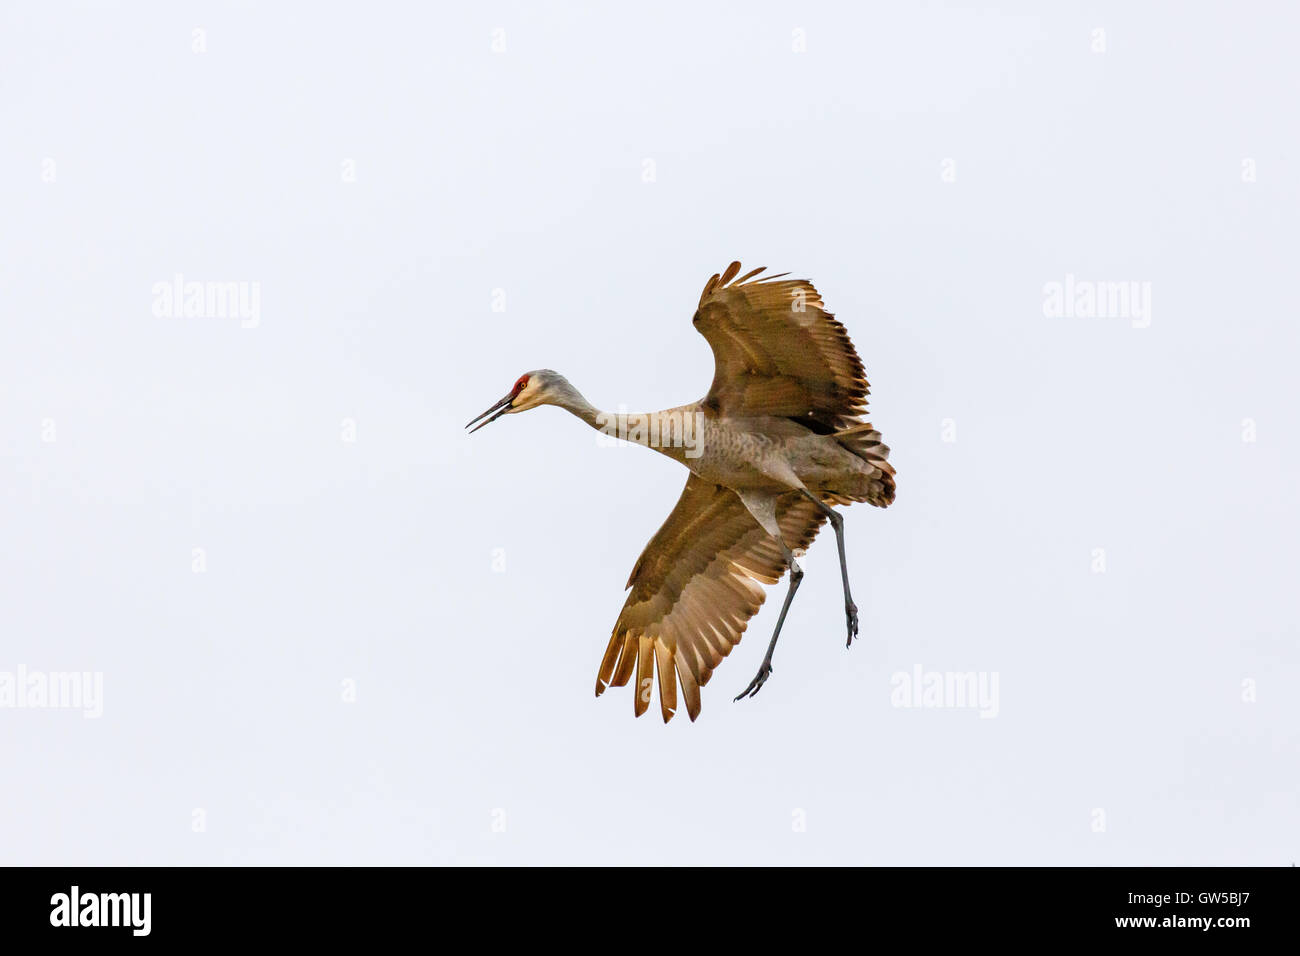 Sandhill Crane coming in for a landing. Stock Photo